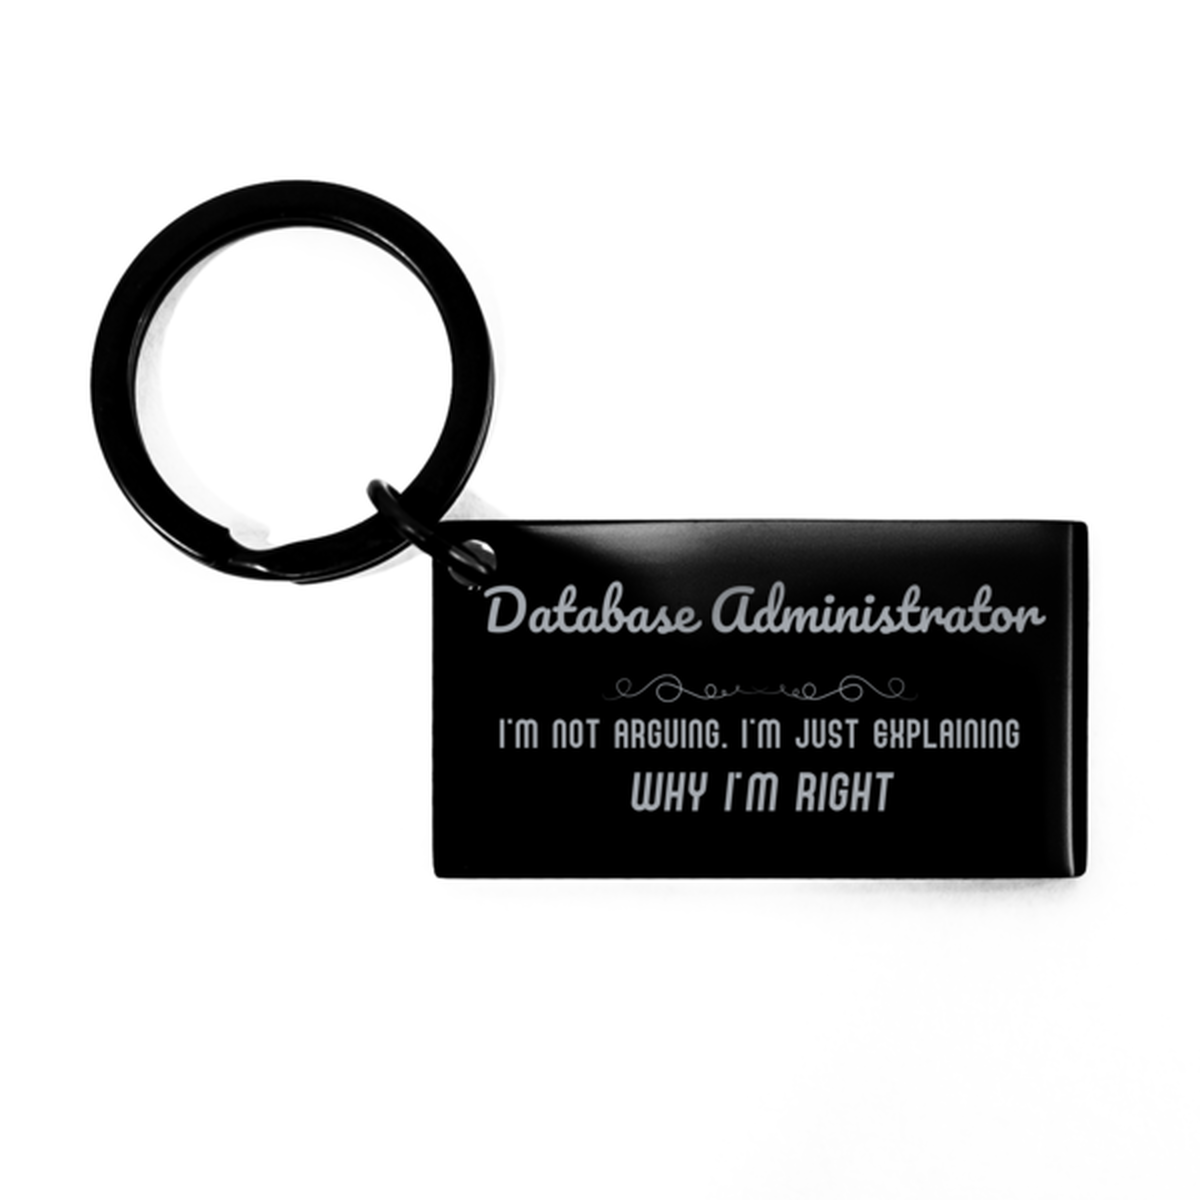 Database Administrator I'm not Arguing. I'm Just Explaining Why I'm RIGHT Keychain, Funny Saying Quote Database Administrator Gifts For Database Administrator Graduation Birthday Christmas Gifts for Men Women Coworker